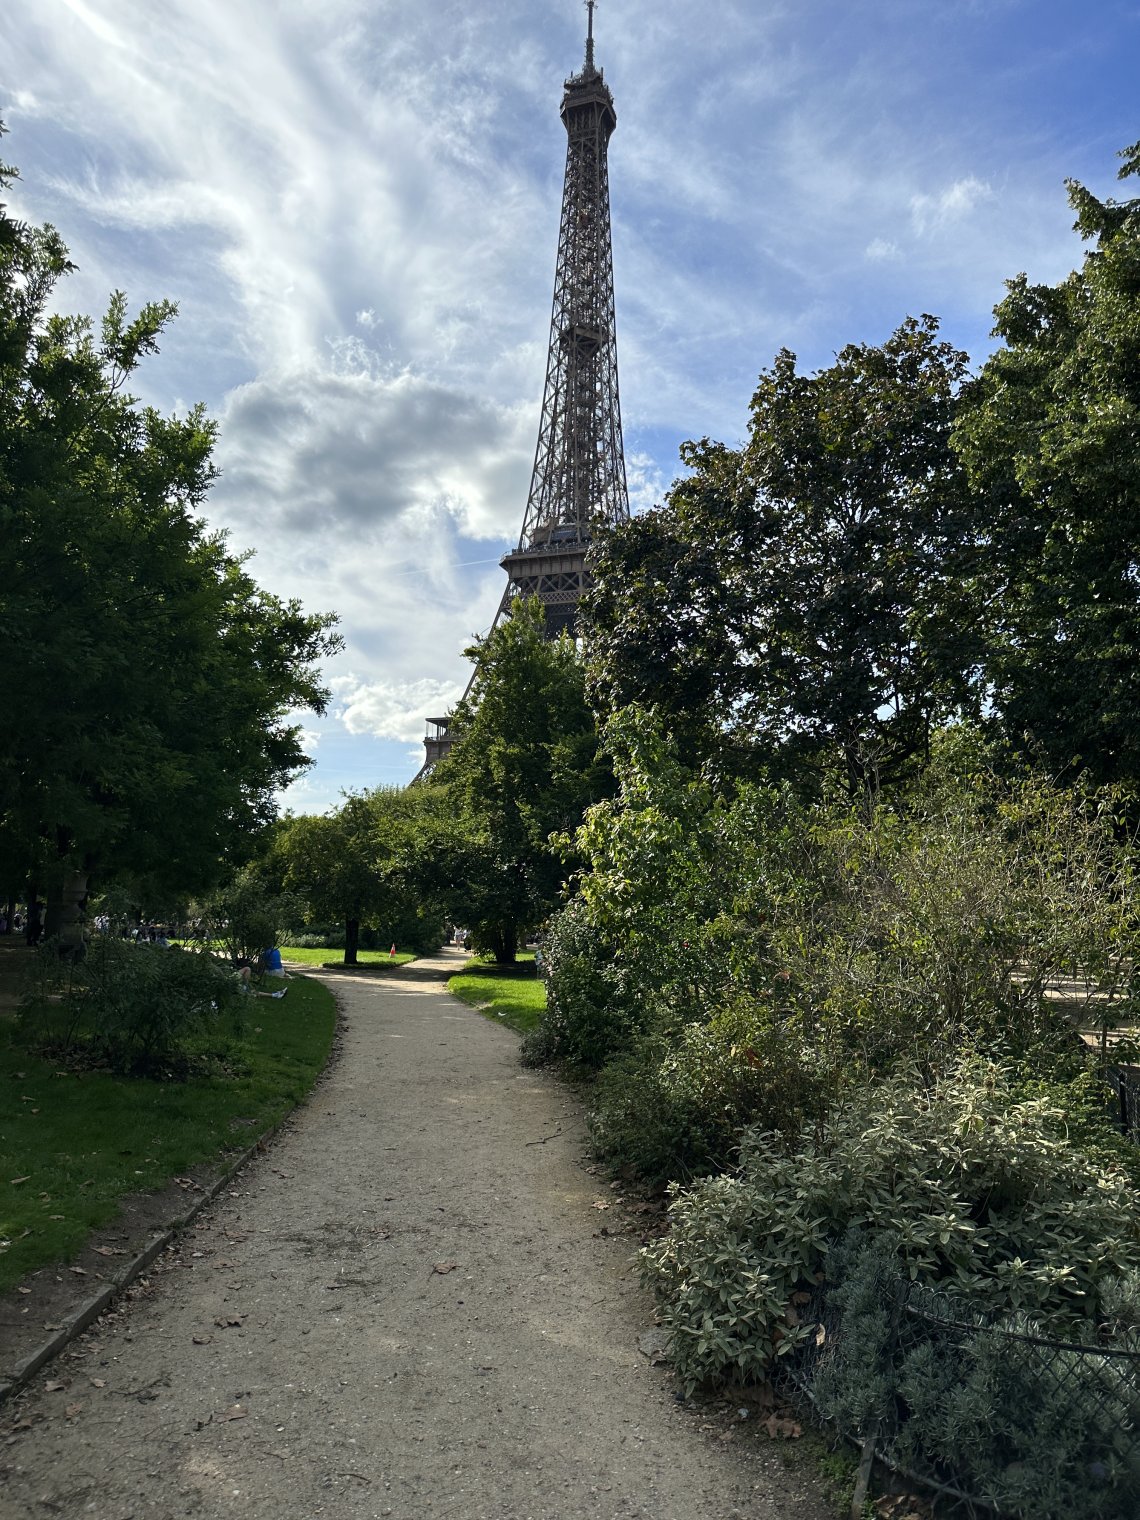 A First Timer's Guide to Paris